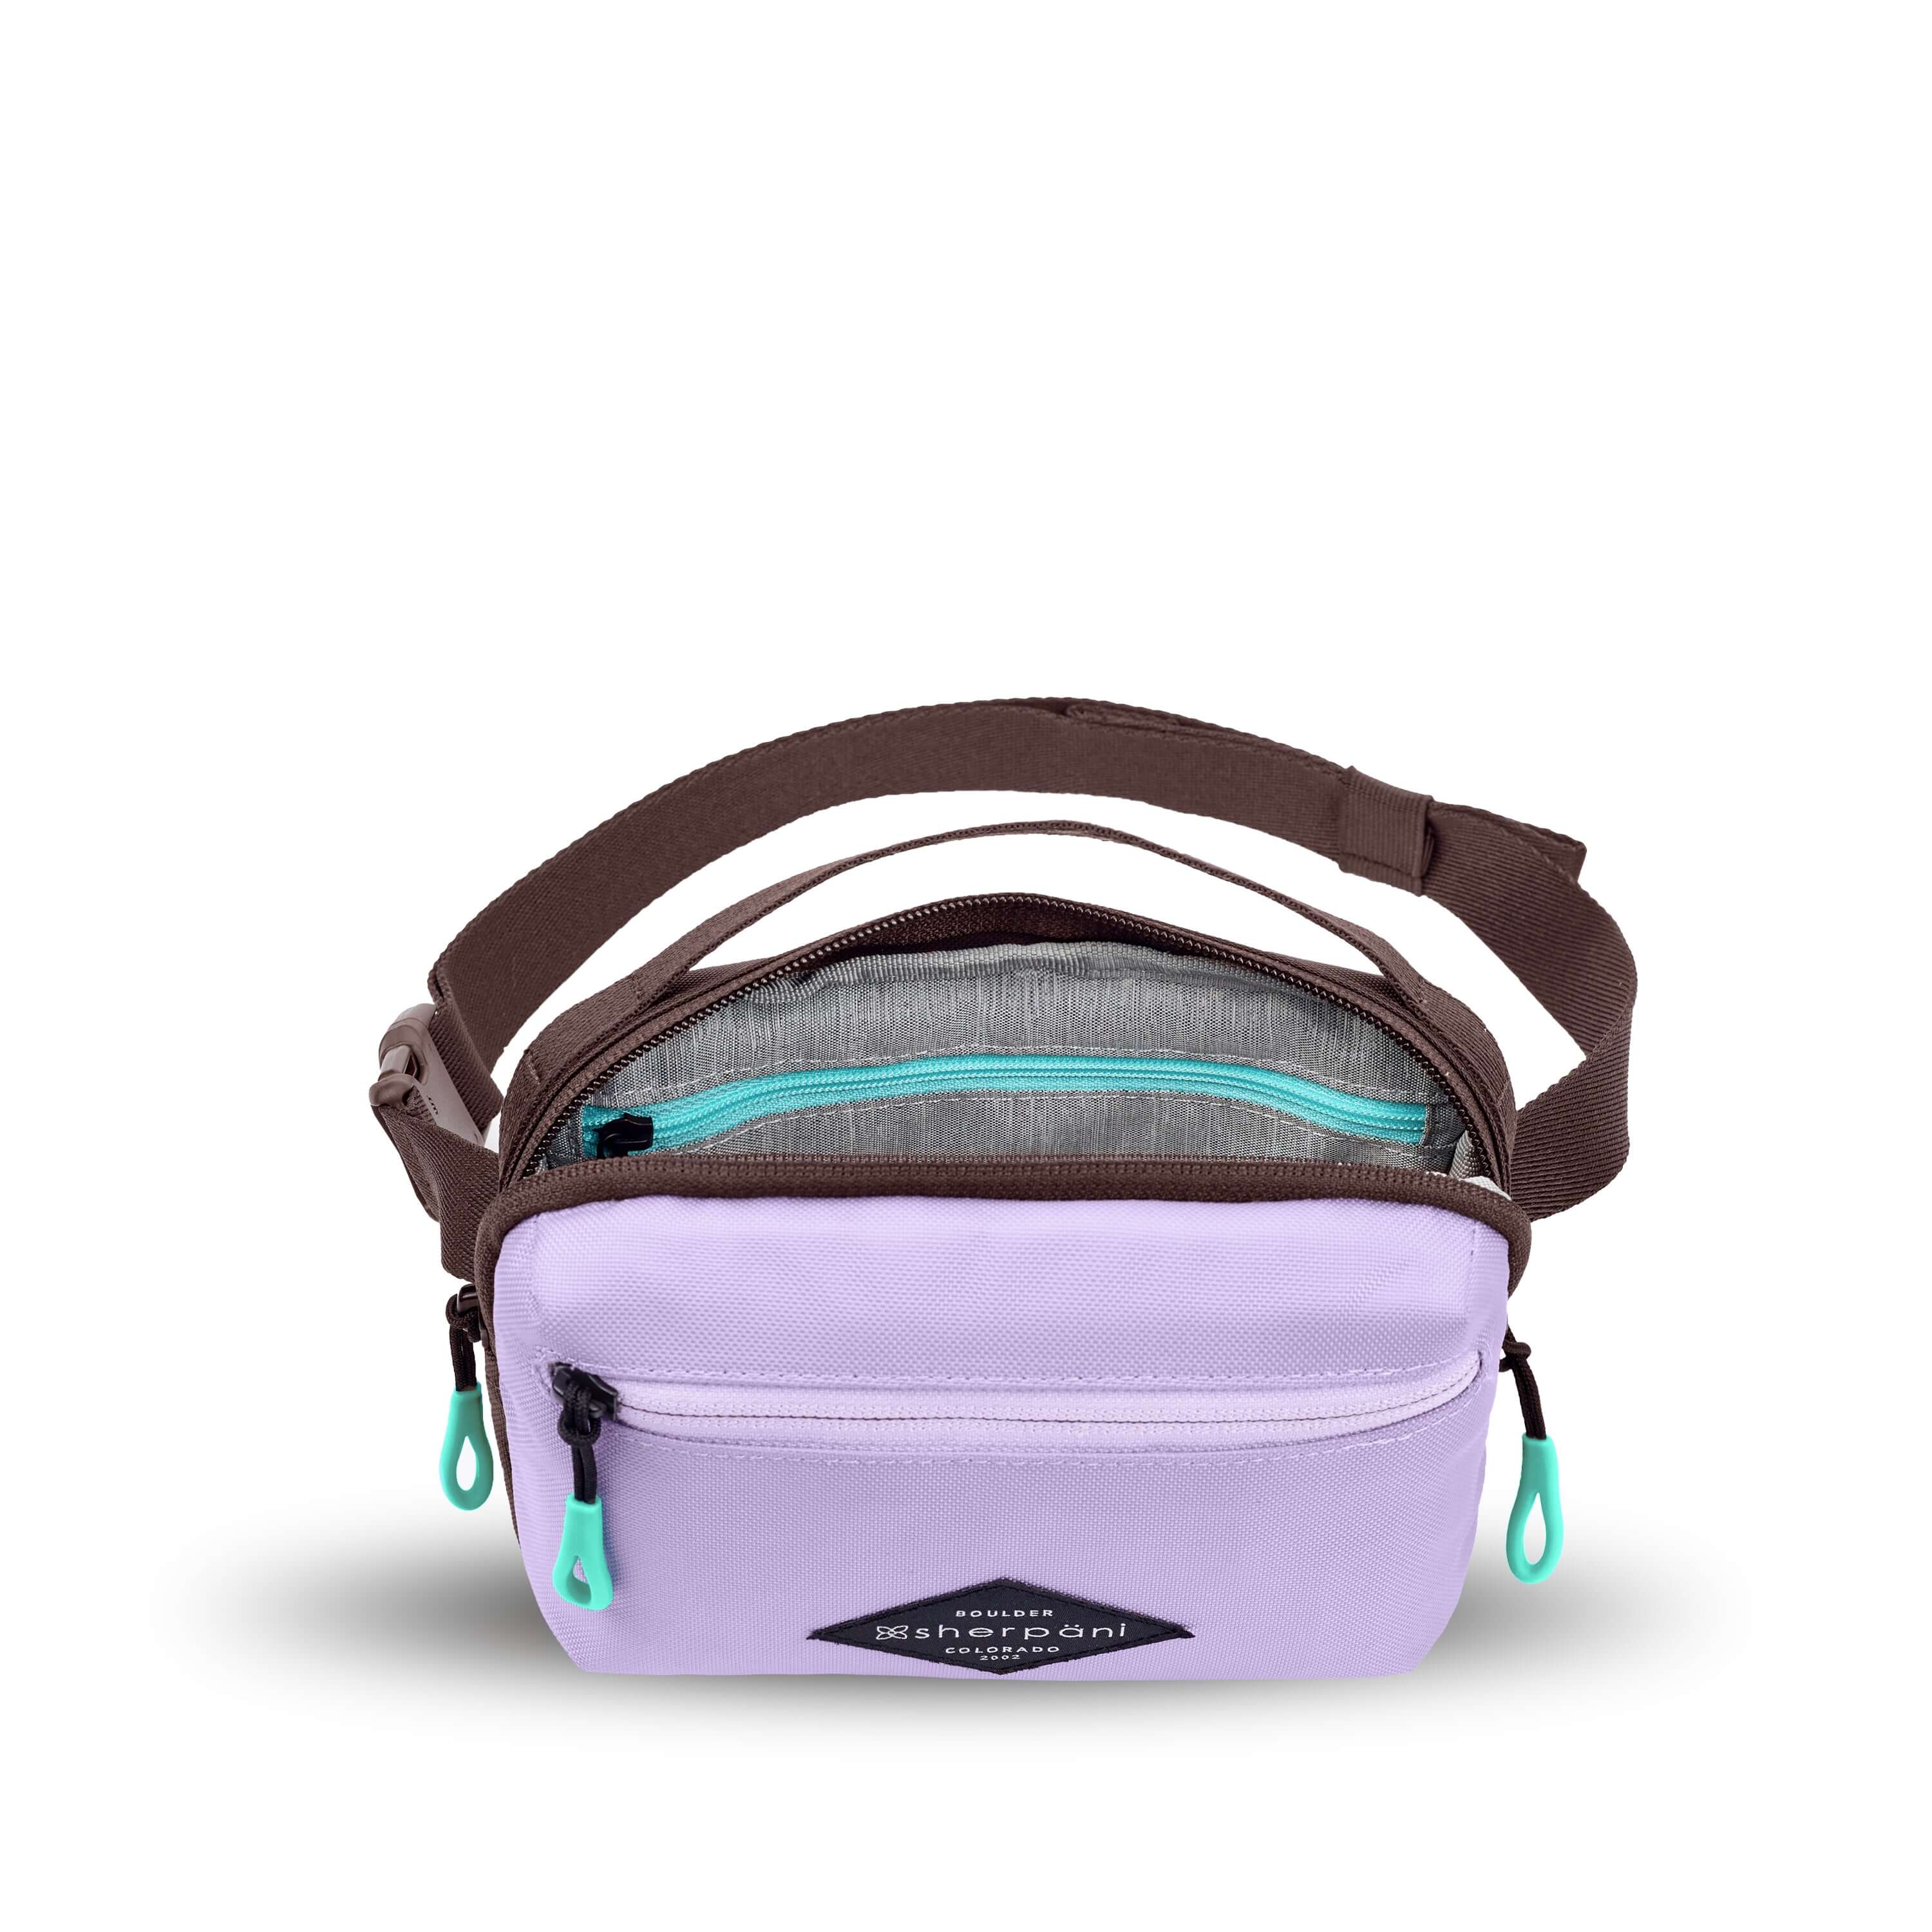 Top view of Sherpani's fanny pack, the Hyk in Lavender. The main zipper compartment is open to reveal a light gray interior and an internal zipper pocket. 